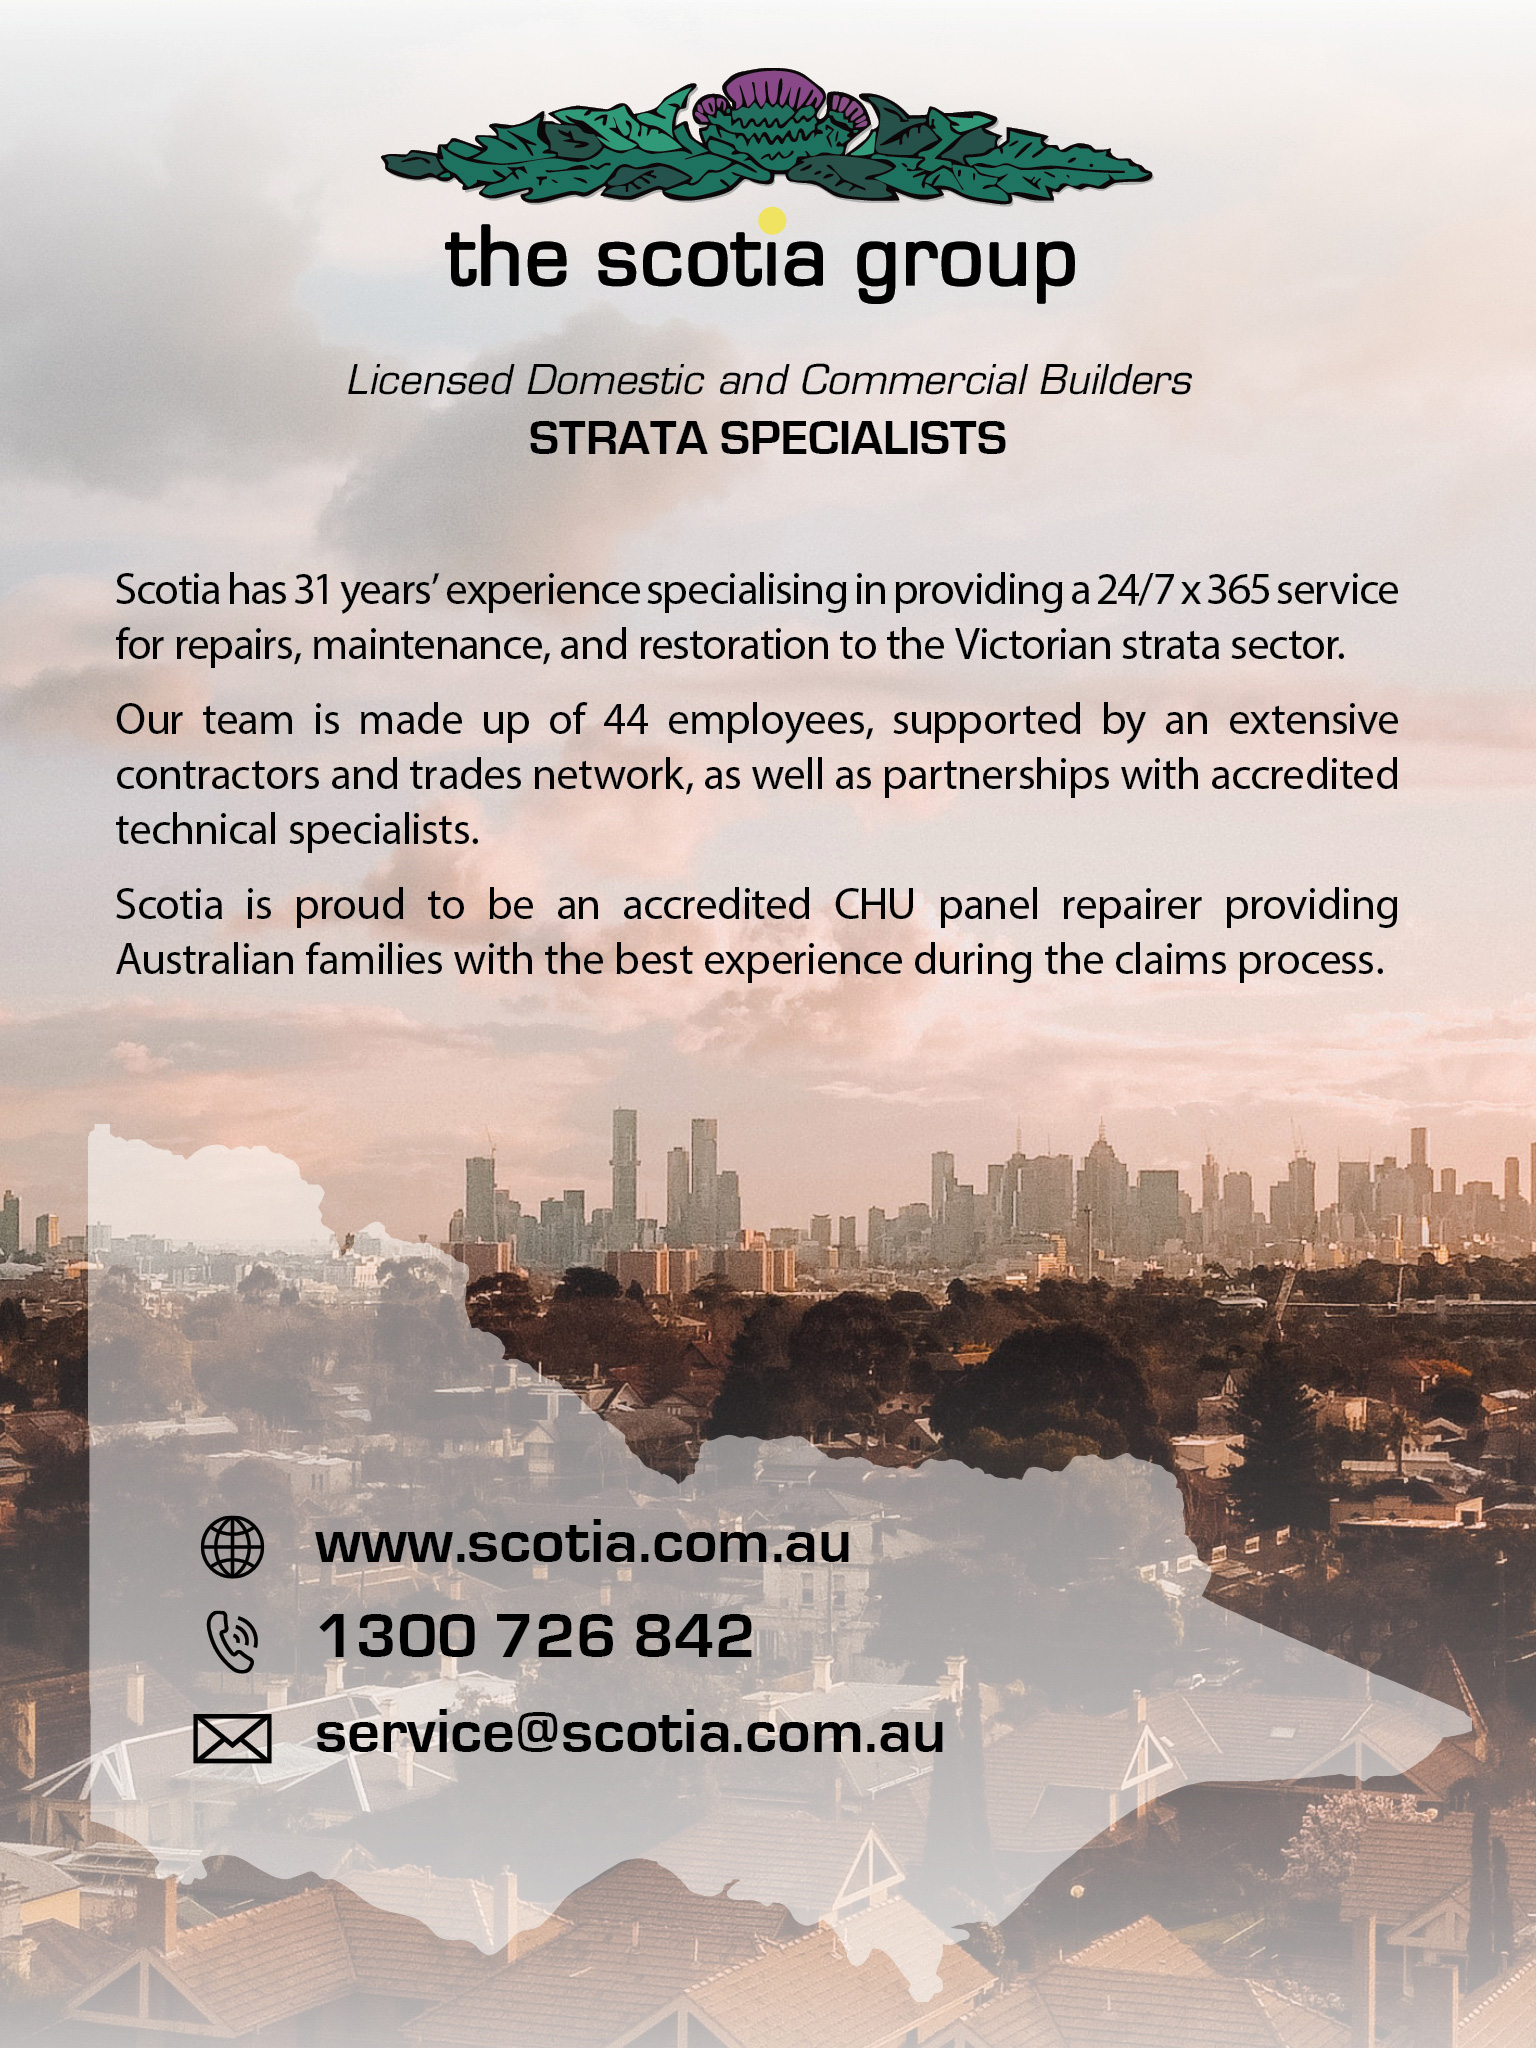 The Scotia Group